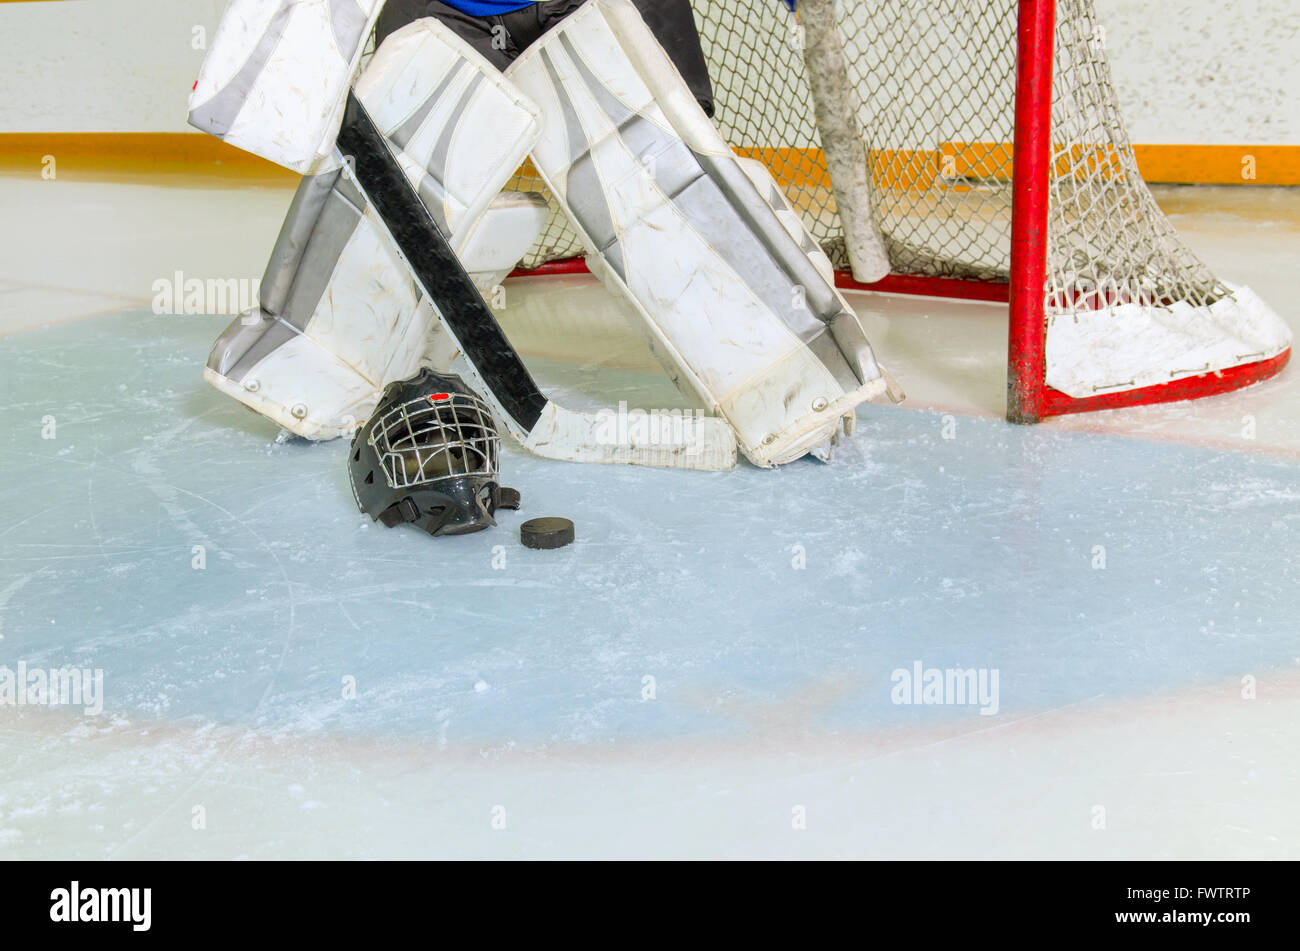 A Hockey Goalie Readies Himself in the Crease and Net Before Game in Rink Stock Photo